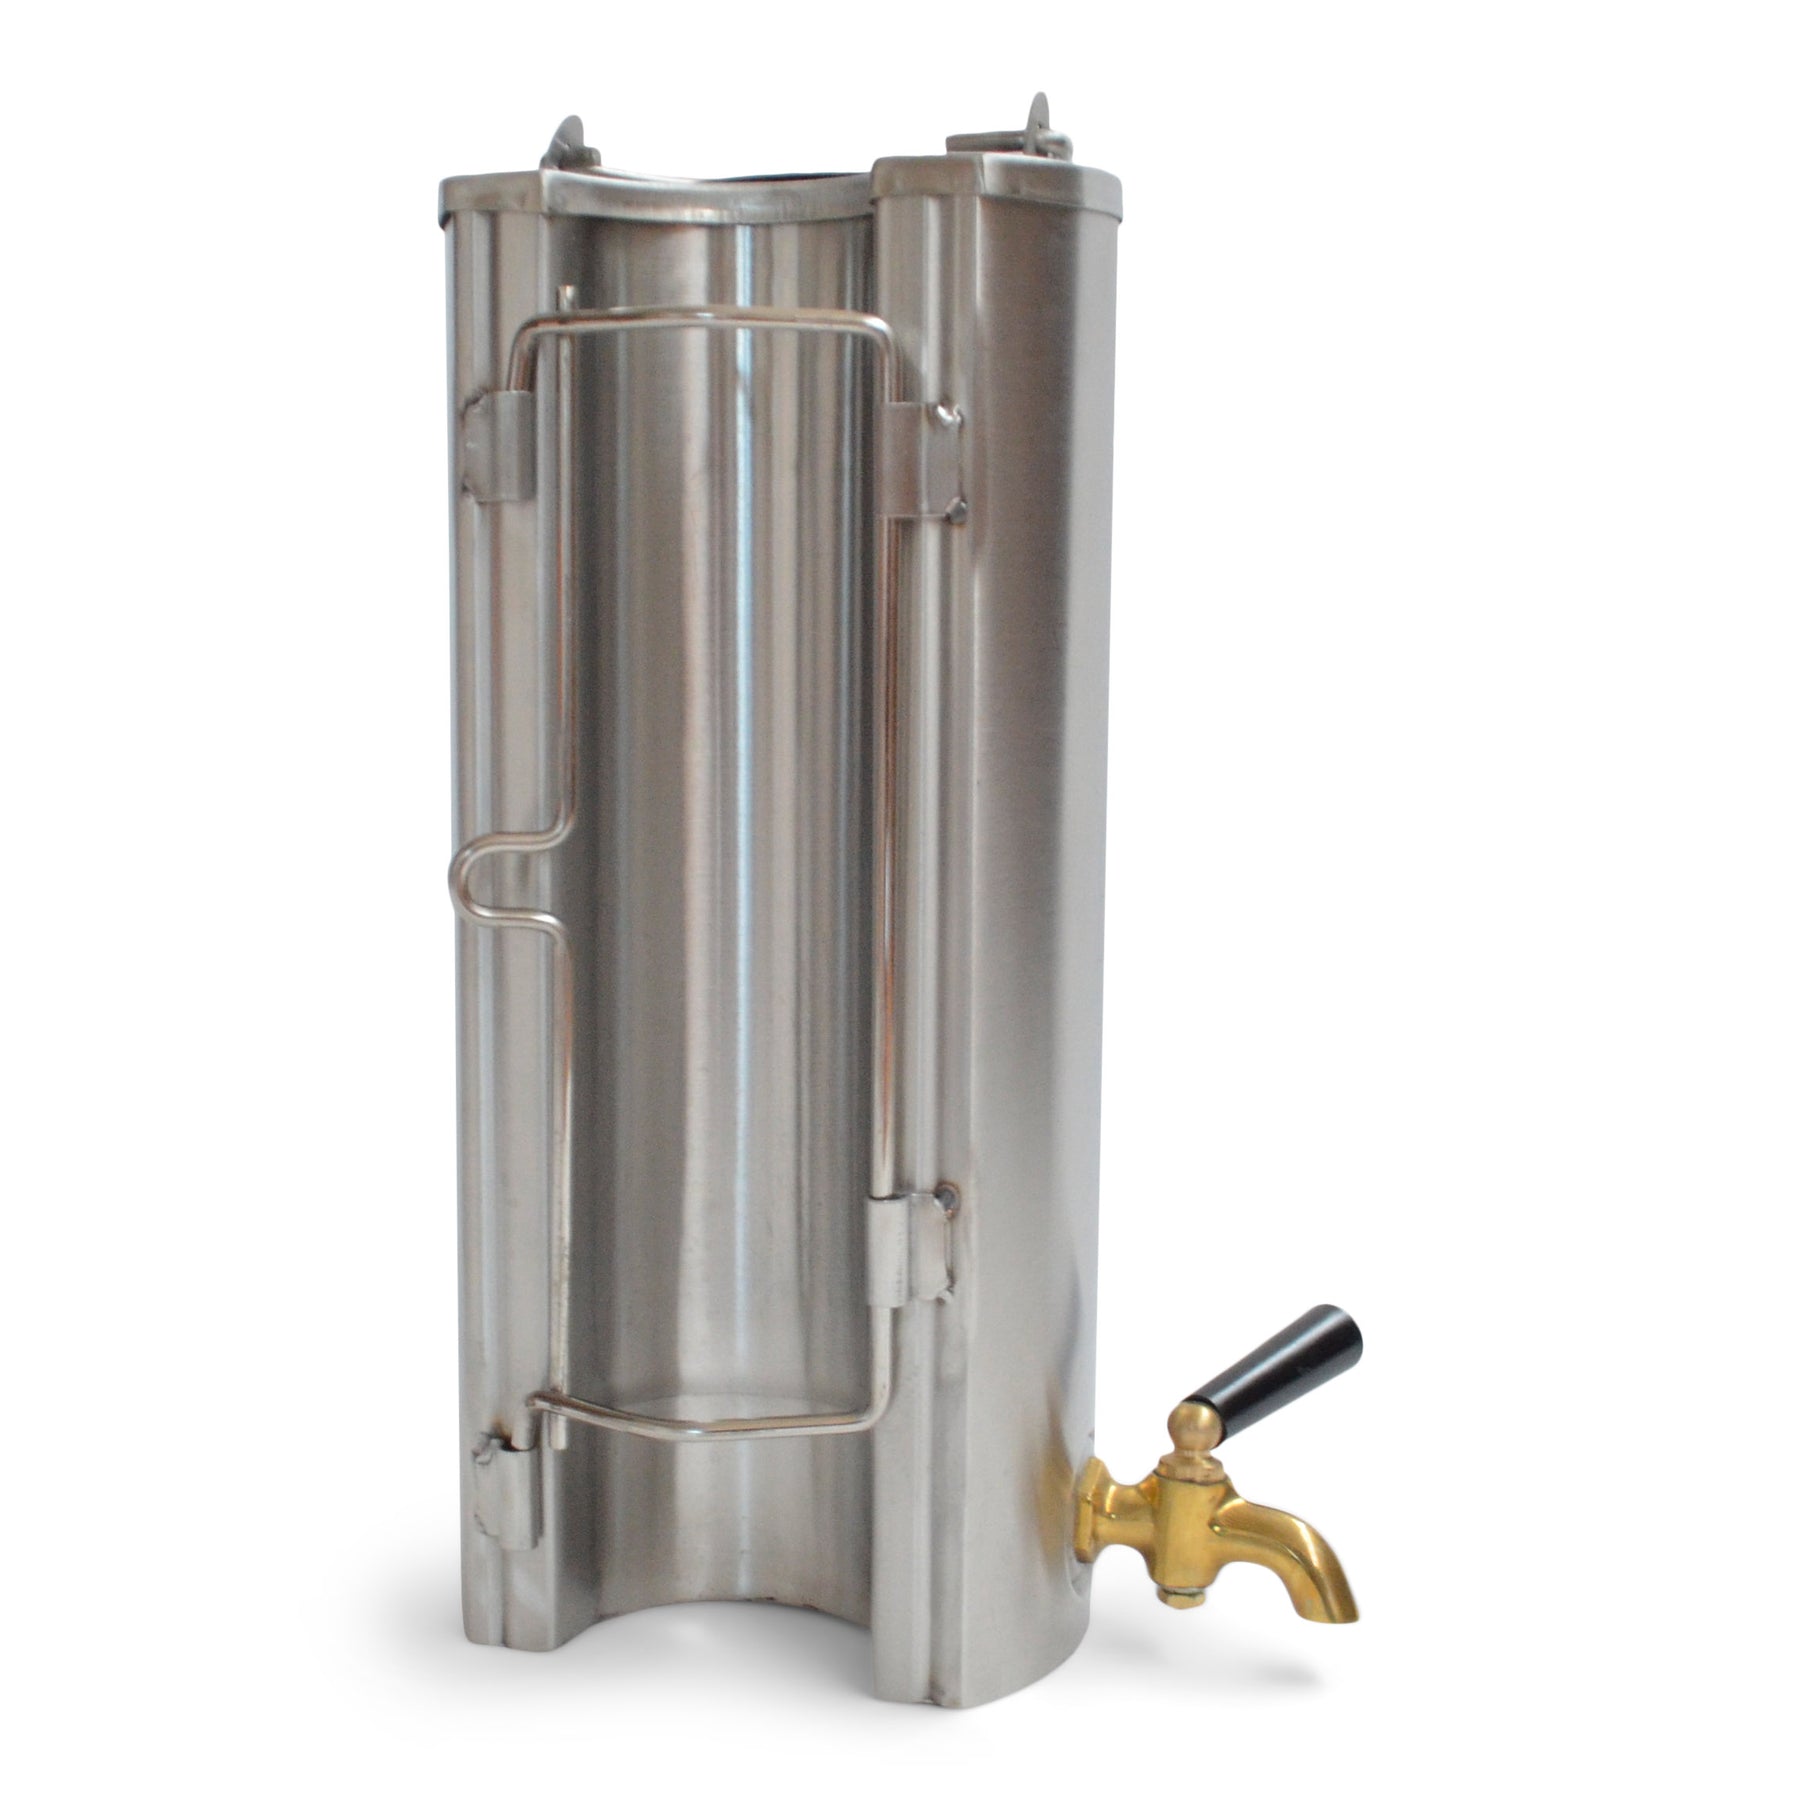 Portable Woodburner Water Heater - For the 'Ruby'